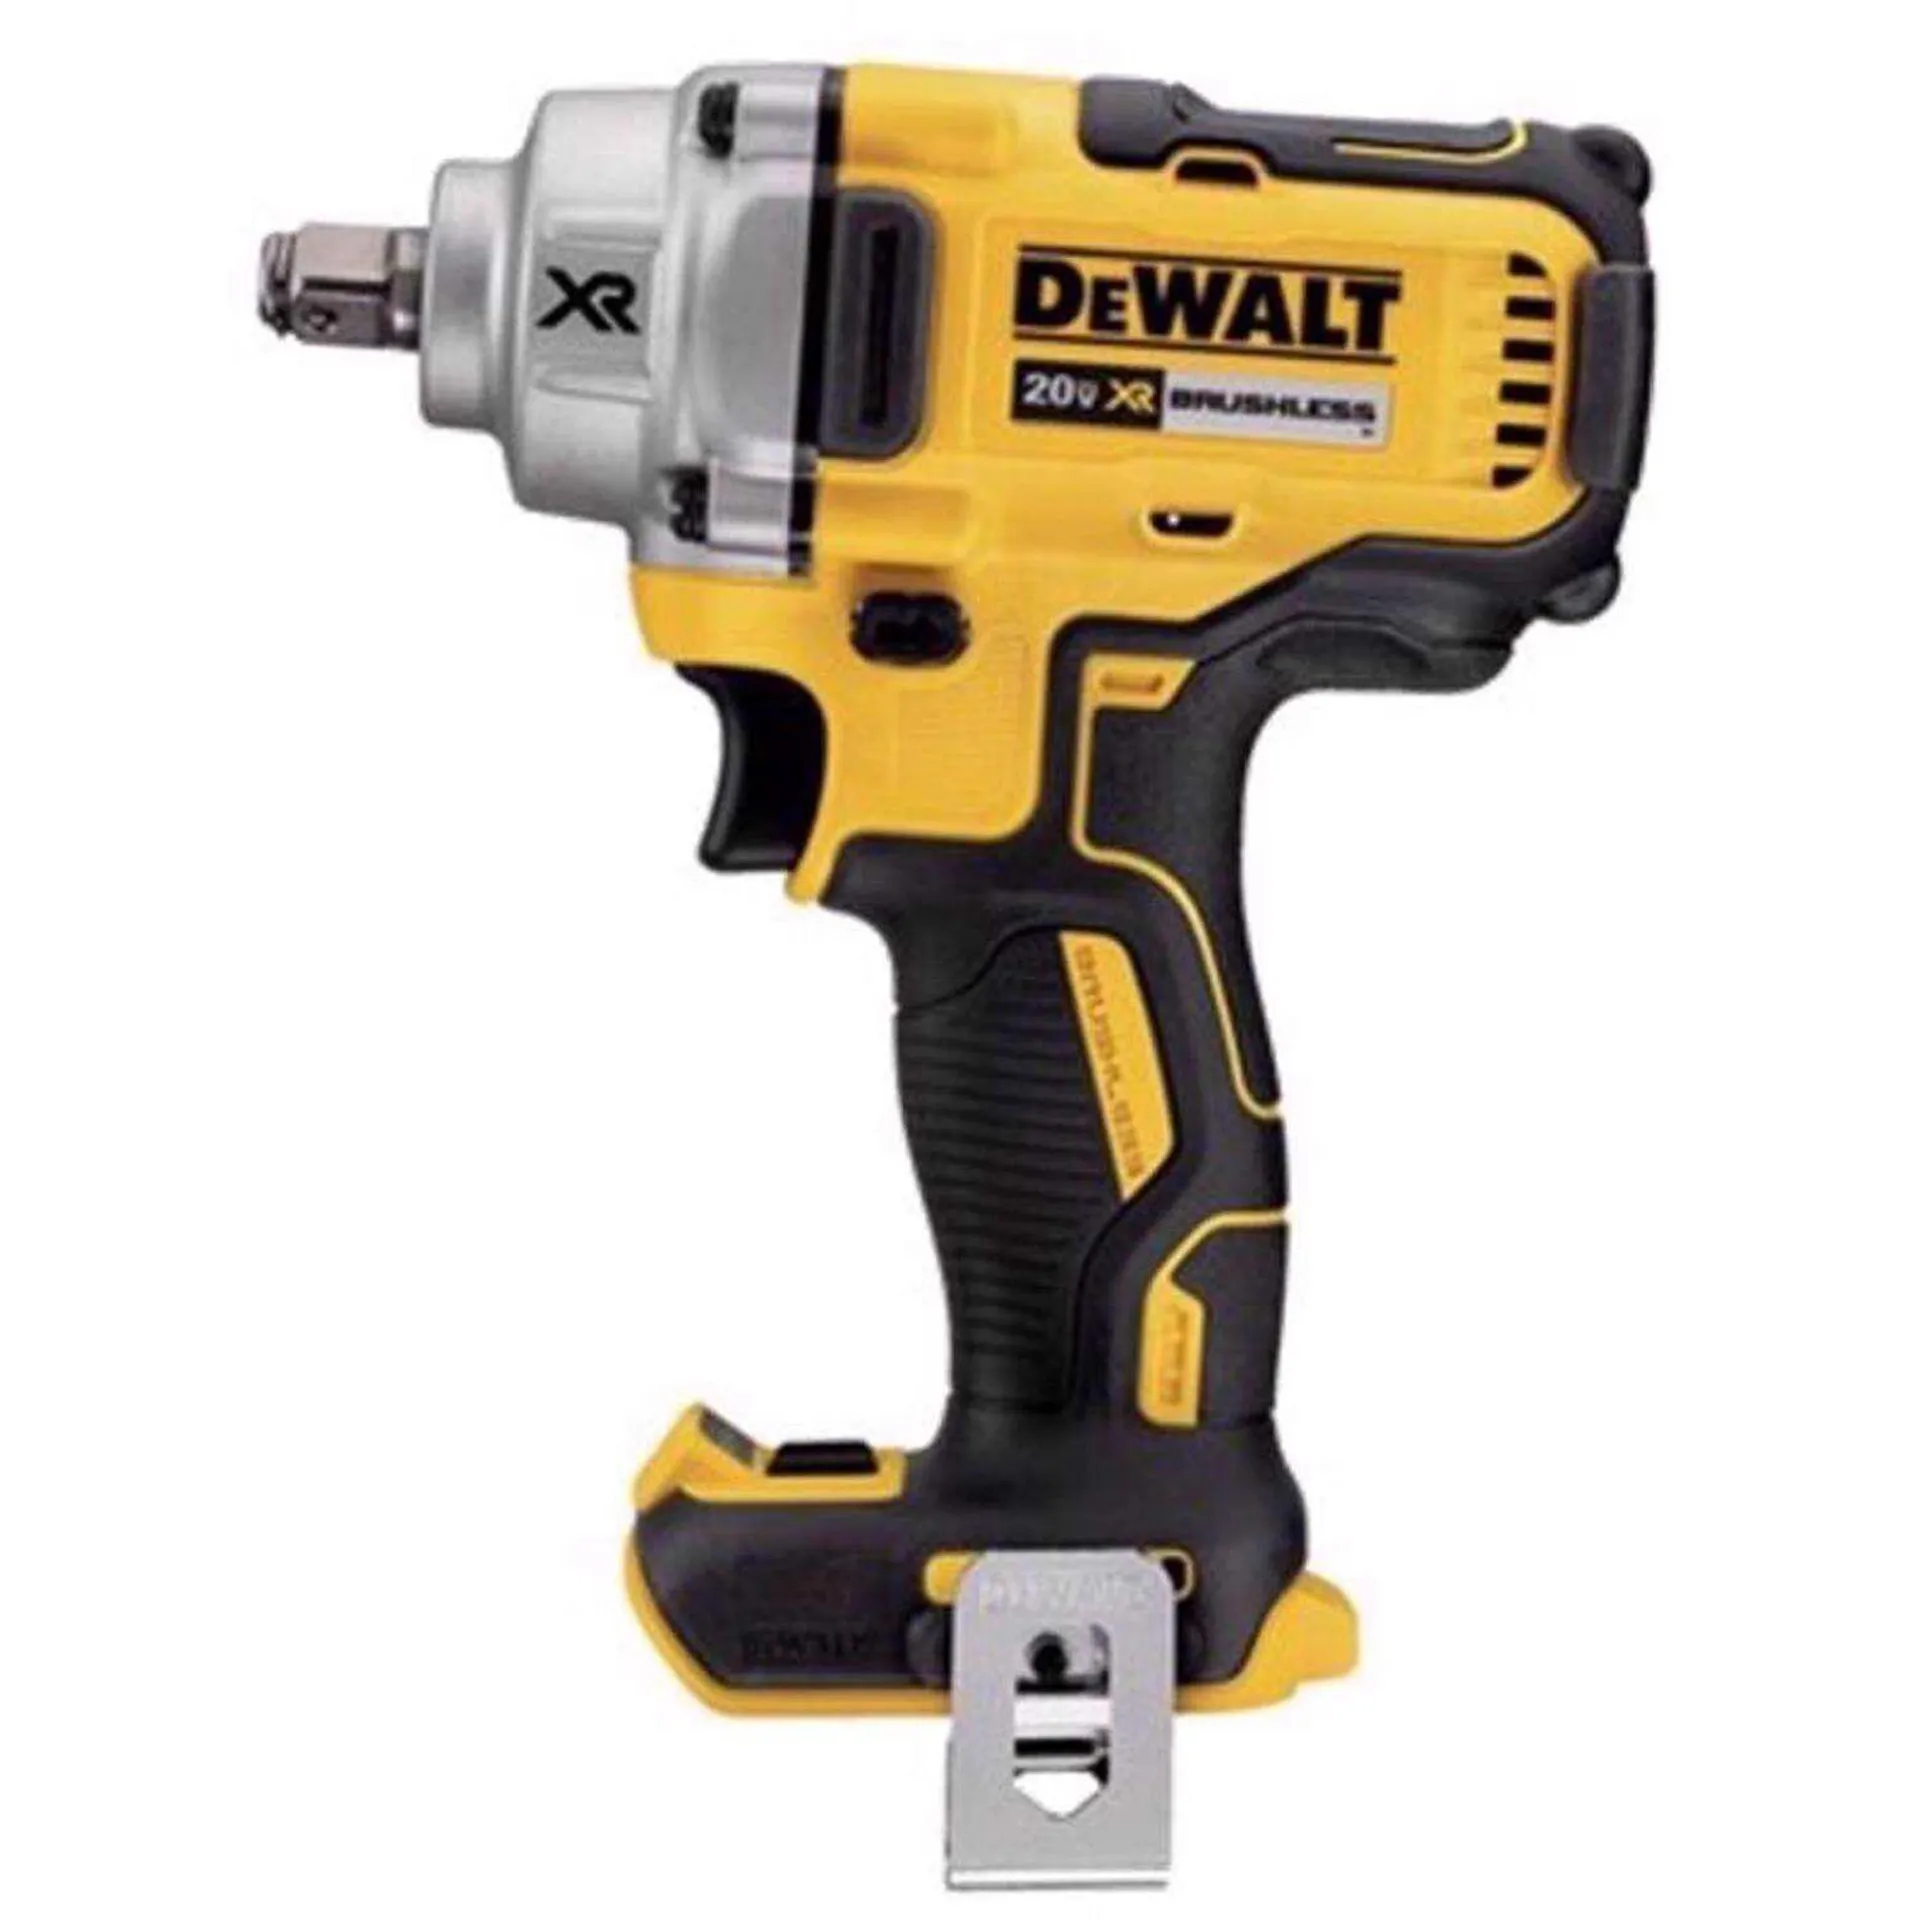 DeWalt 20V MAX 1/2 in. Cordless Brushless Mid-Range Impact Wrench Tool Only